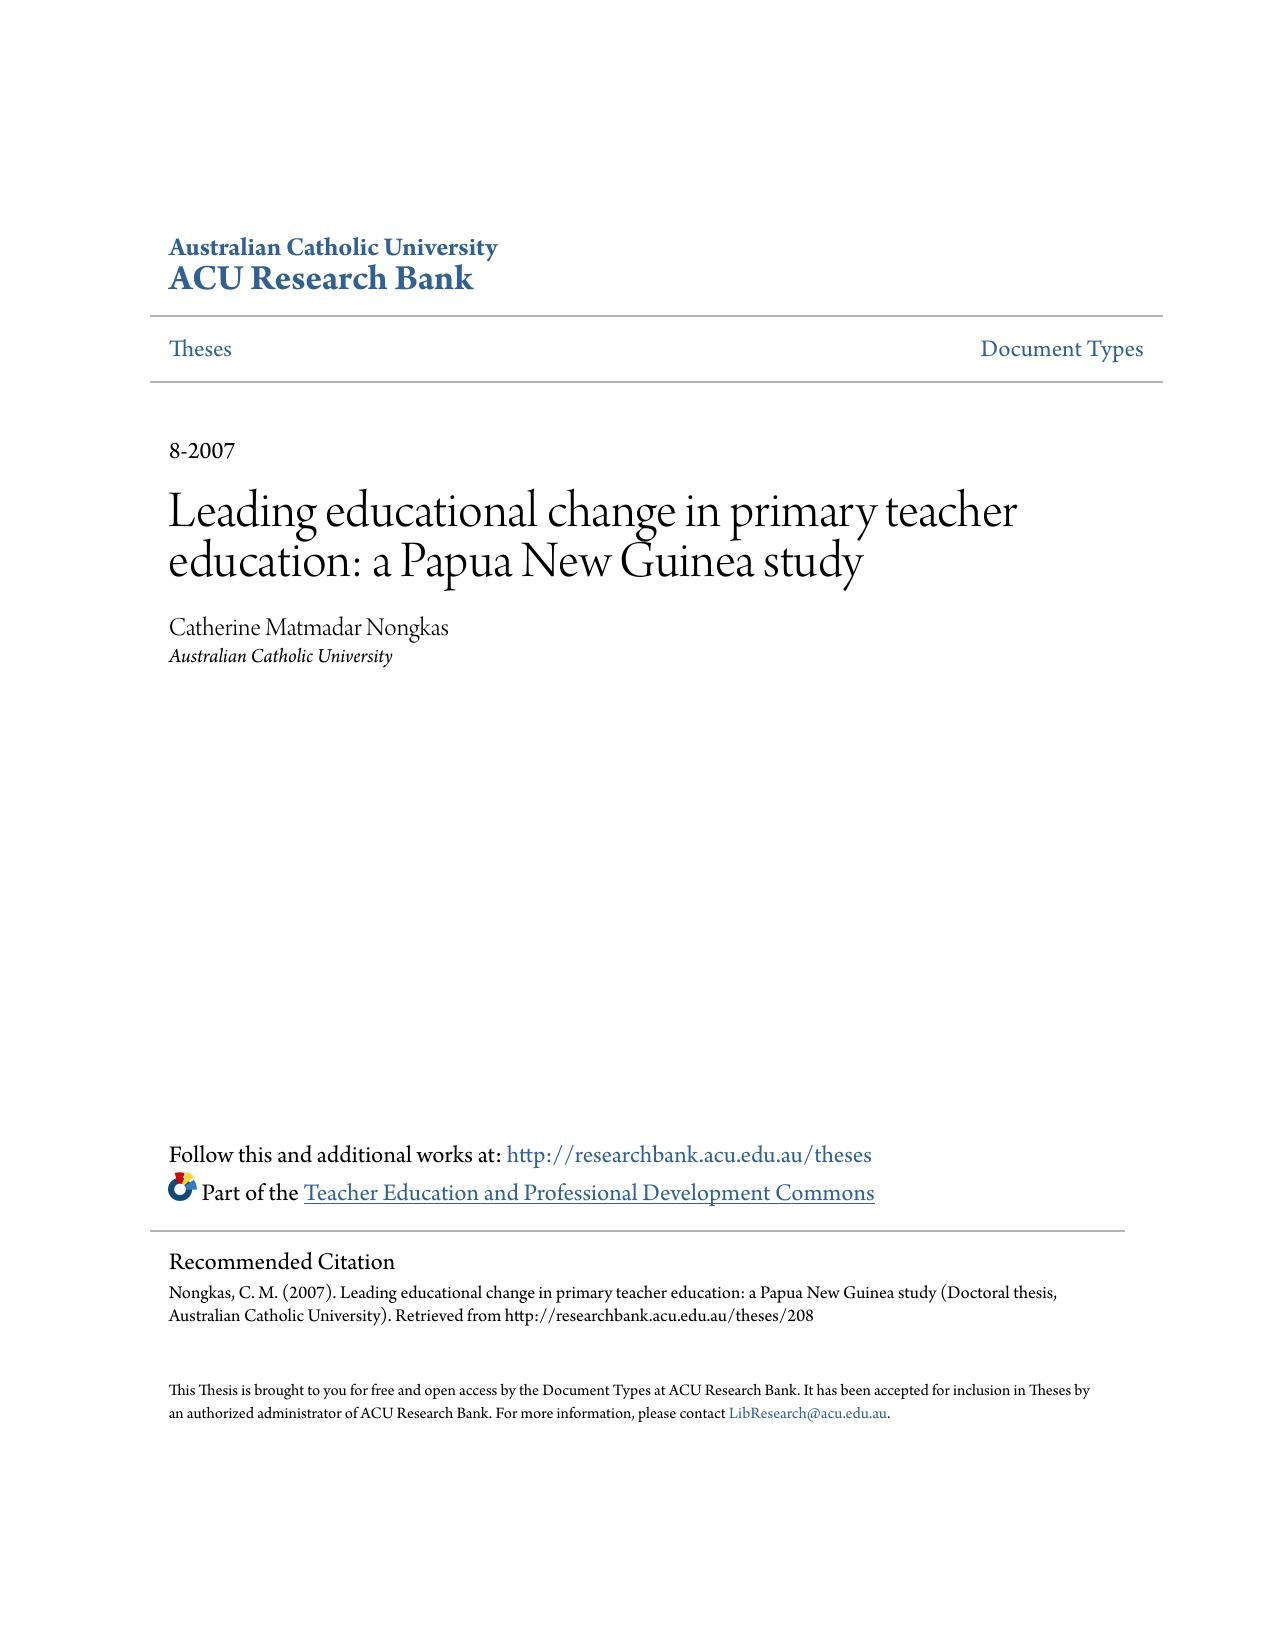 Leading educational change in primary teacher education: a Papua New Guinea study